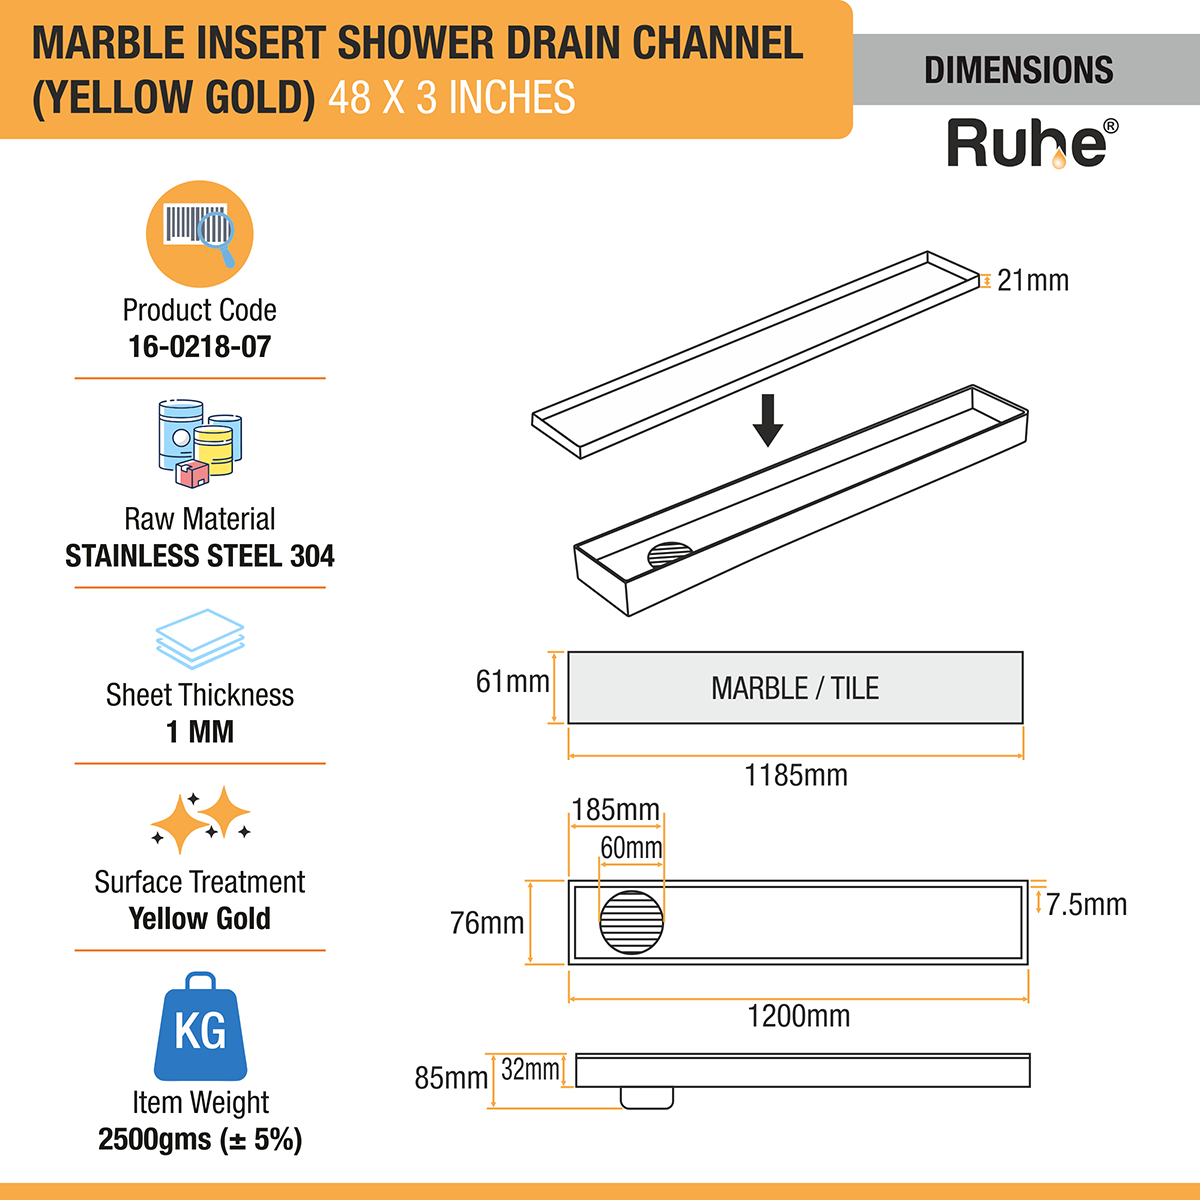 Marble Insert Shower Drain Channel (48 x 3 Inches) YELLOW GOLD PVD Coated dimensions and sizes